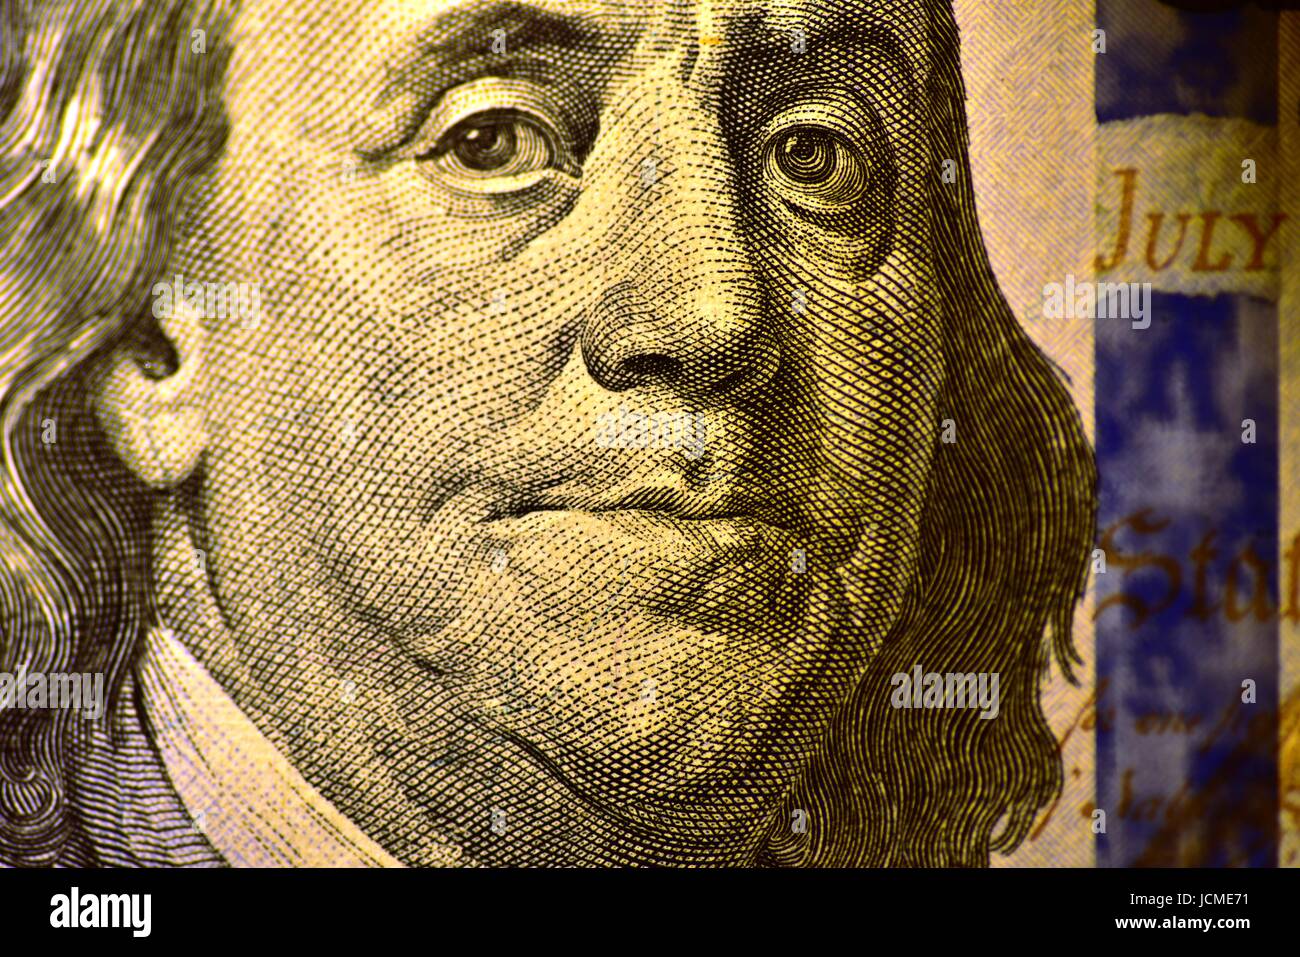 Benjamin Franklin and the United States Declaration of Independence on obverse of the 100 US dollar bill Stock Photo